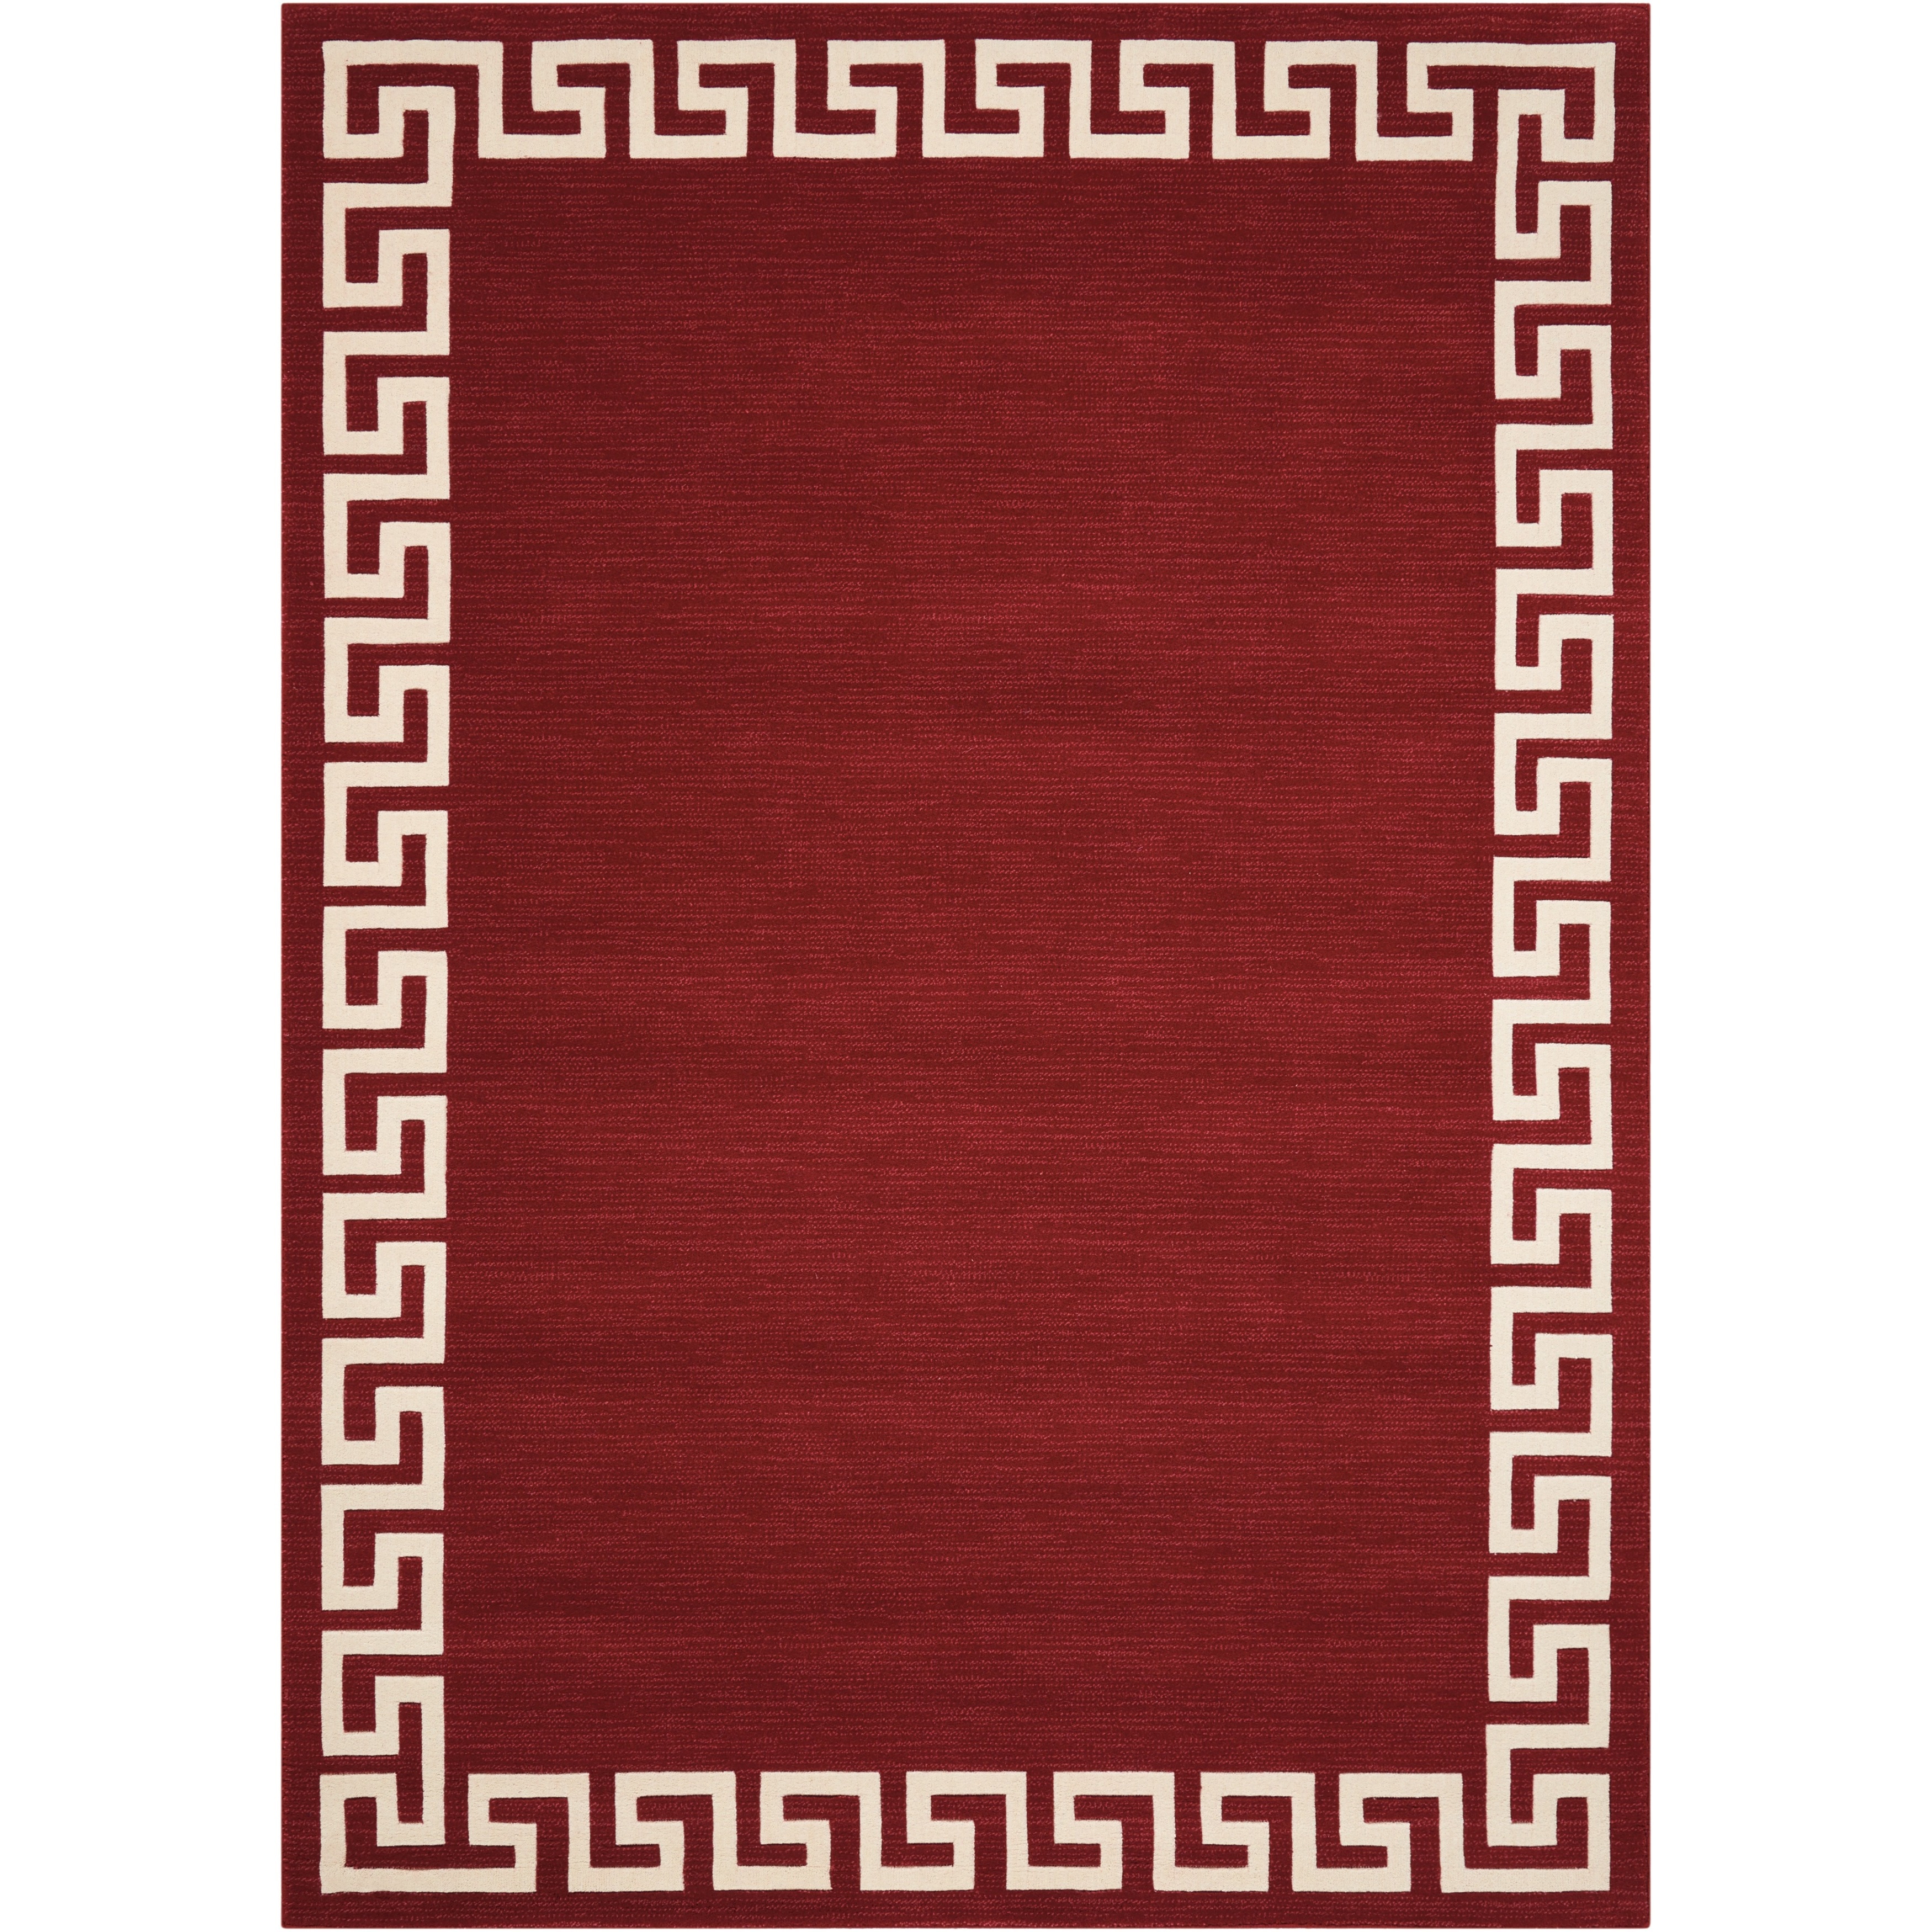 2'3 x 7'6 2-Feet 3-Inches by 7-Feet 6-Inches Nourison Ck206 Linear Glow Sumac Runner Area Rug 